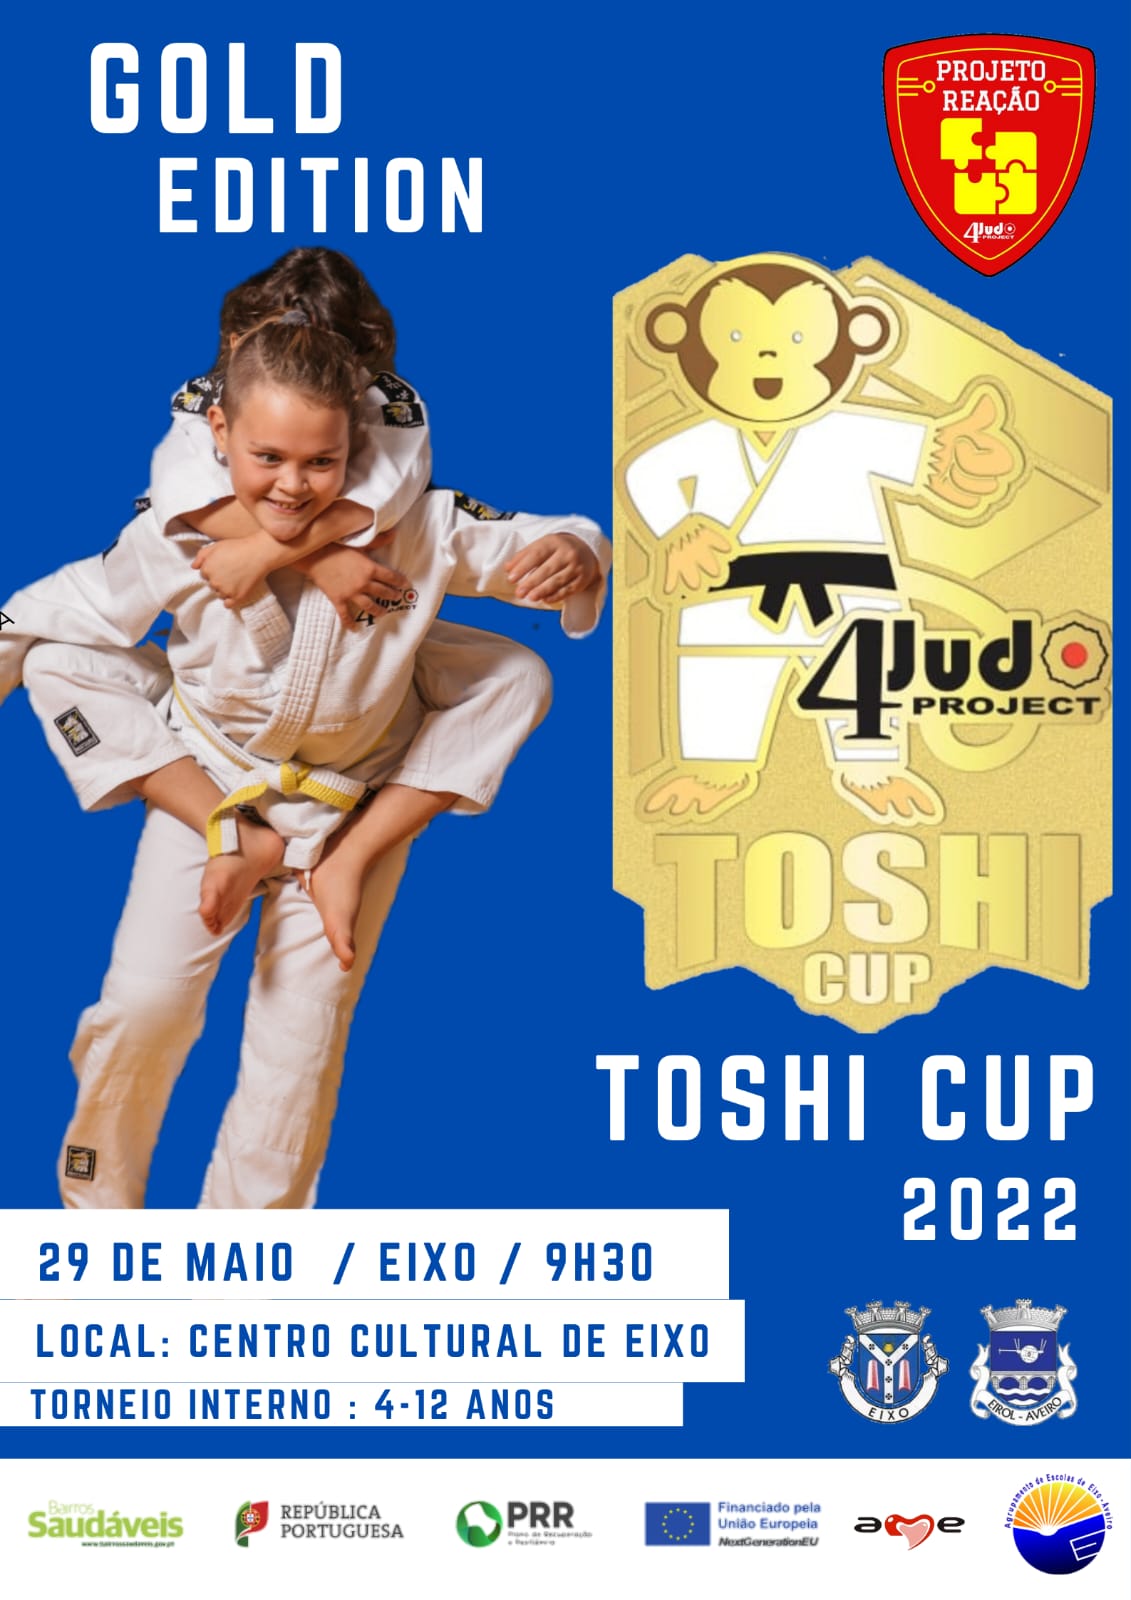 Toshi Cup – Gold Edition